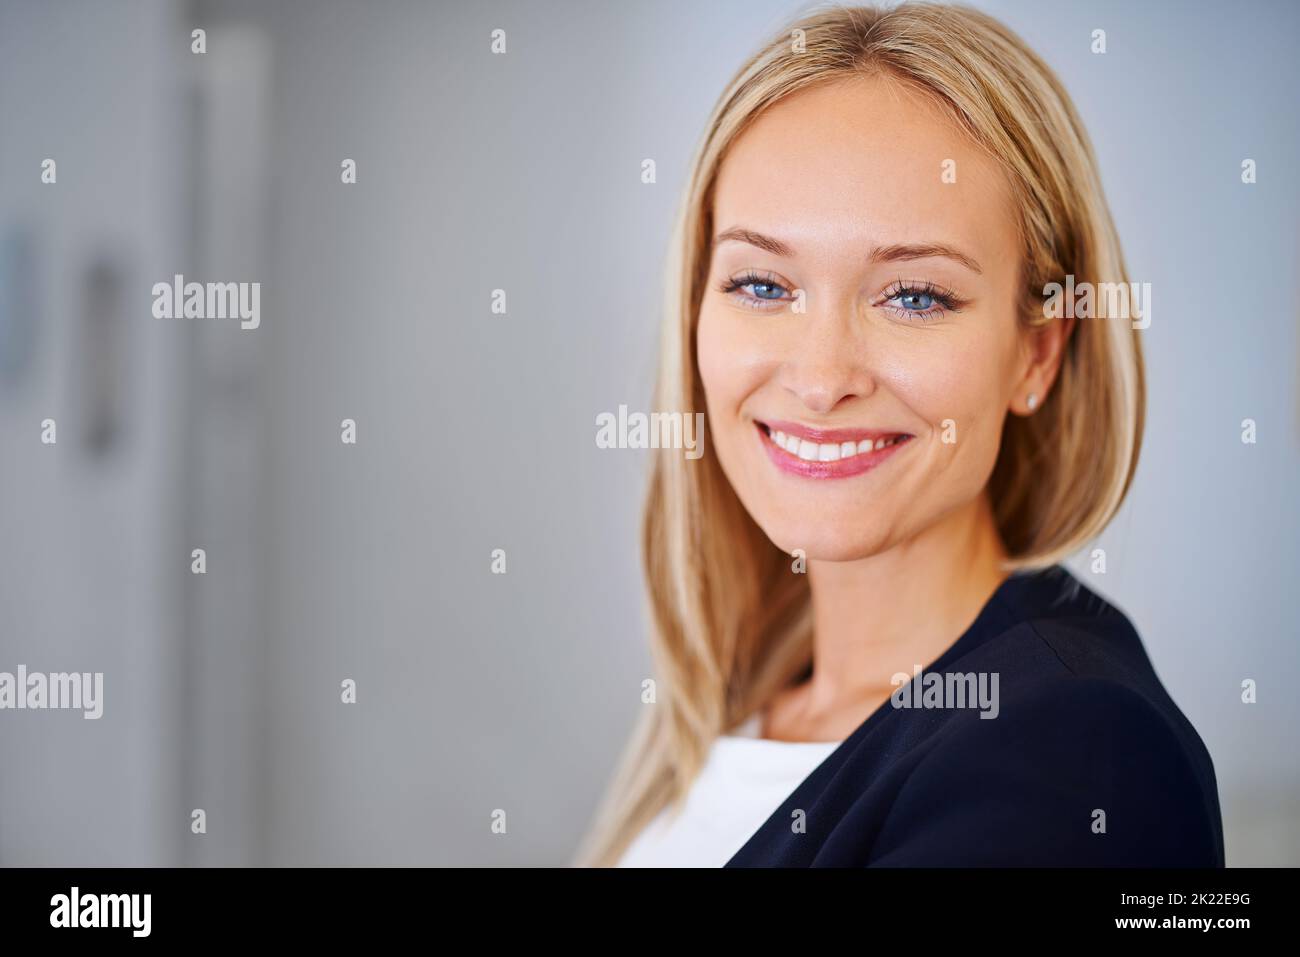 Shes a self-made success. well dressed woman looking at the camera. Stock Photo